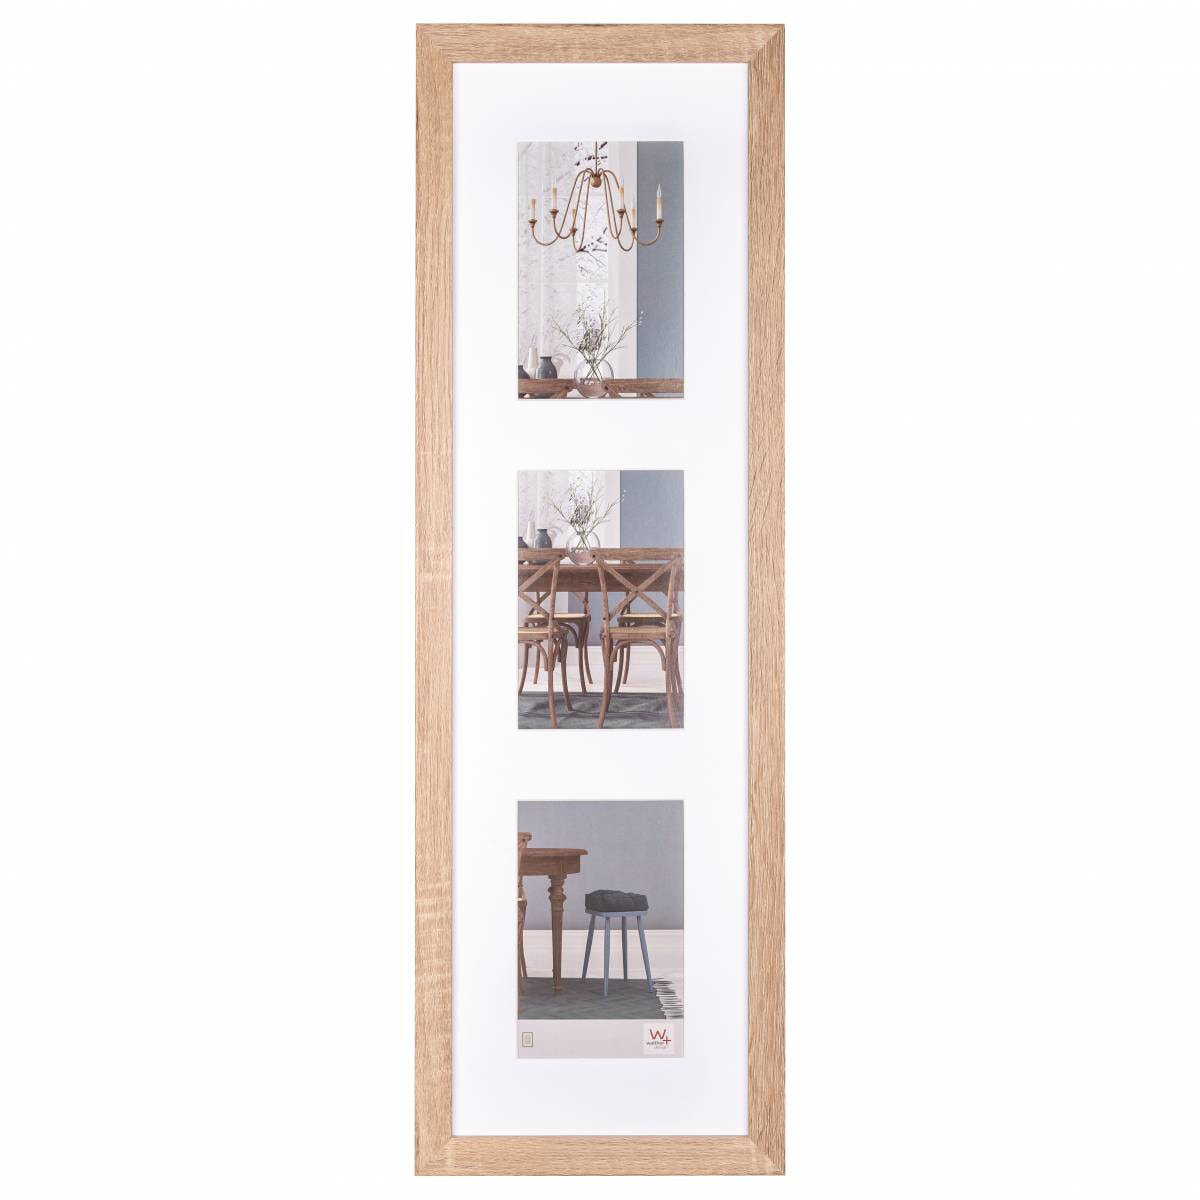 Walther Fiorito eiken 3x10x15 hout incl. passepartout EF315VE - MDF - Oak - Single picture frame - Wall - Rectangular - Non-reflective